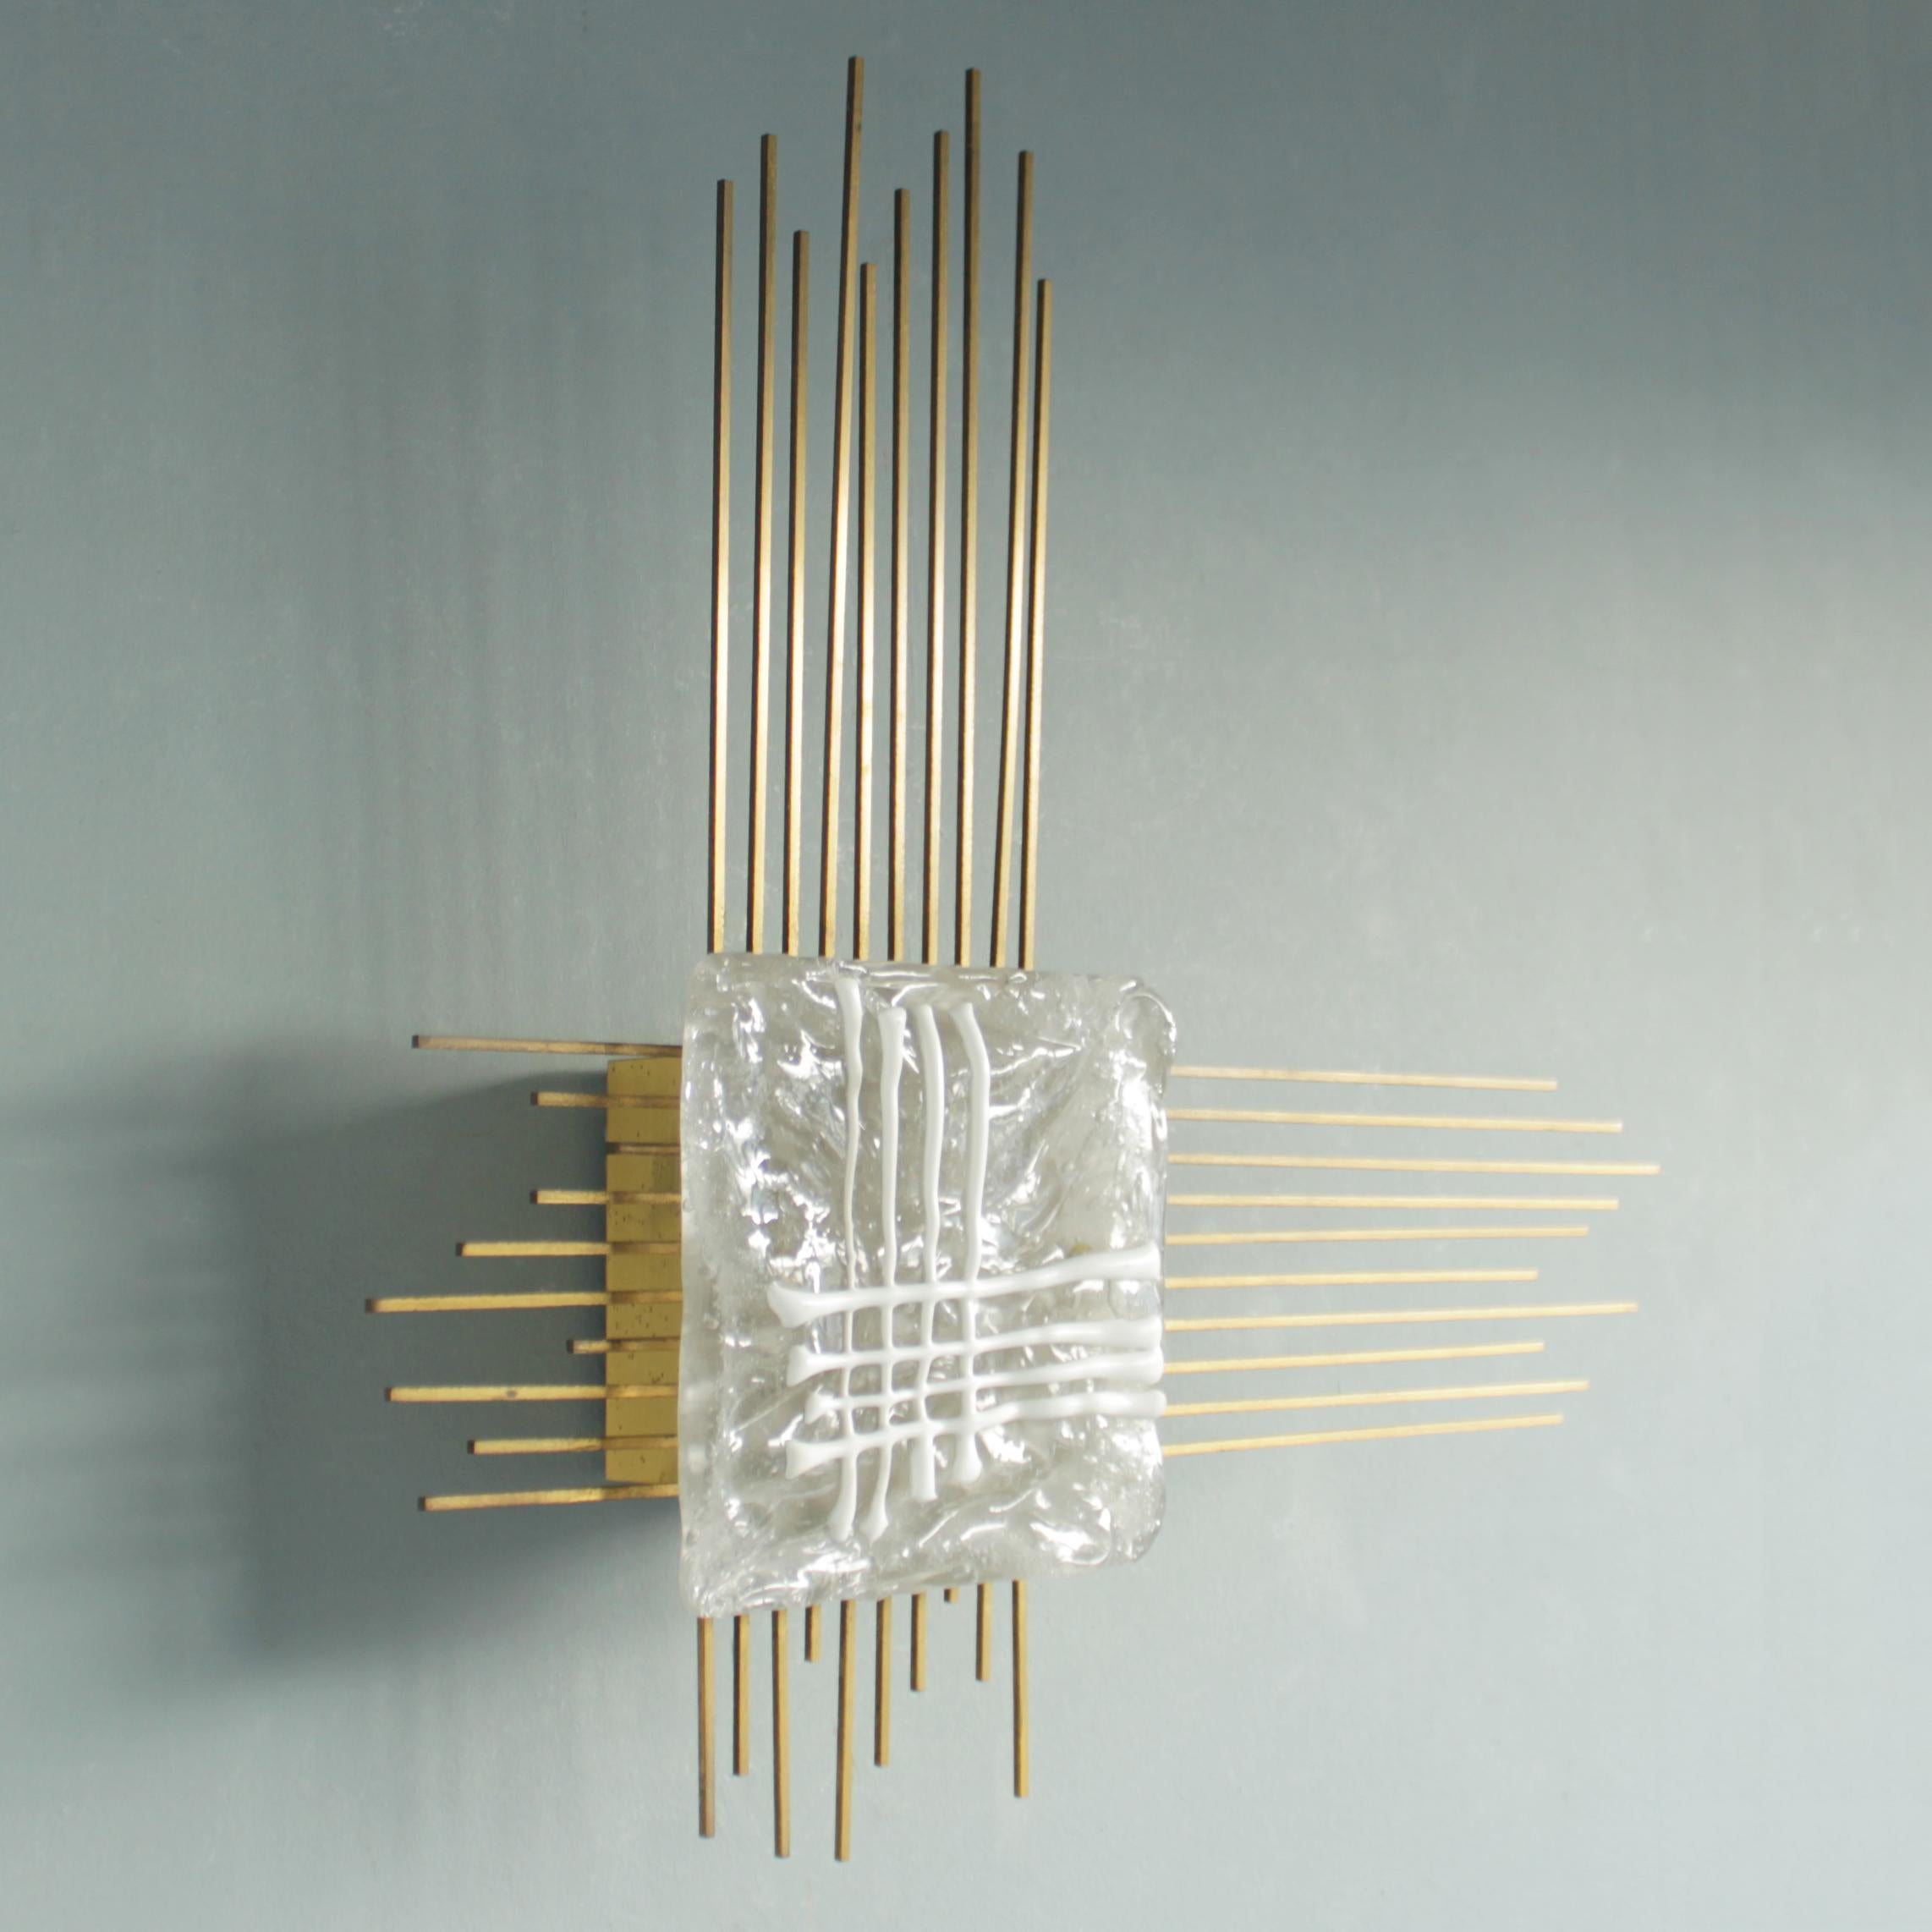 Sculptural wall lamp by Angelo Brotto for Esperia Italy, 1960s.
Wall light in brass with a front of Murano glass. In a beautiful original condition.
Dimensions: height 25.0 in. (63,5 cm), width 25.0 inches (63,5 cm) and depth 5.1 in. (13 cm). Art